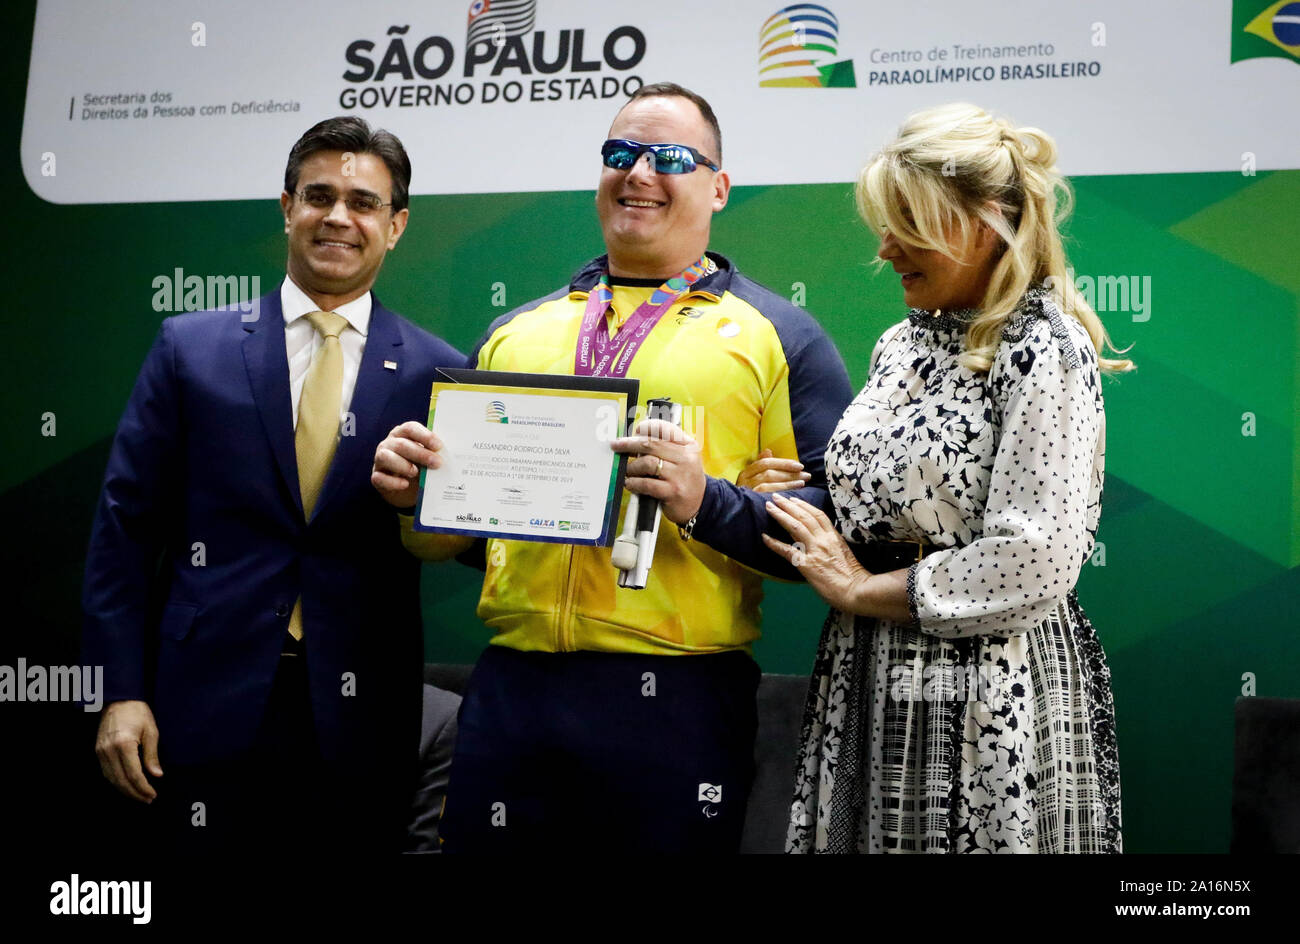 SÃO PAULO, SP - 24.09.2019: DORIA HOMENAGEIA ATLETAS PARALÍMPICOS - The government of the State of Sao Paulo, delivers the sporting merit medal and diploma to the Paralympic athletes of the Sao Paulo team, who participated in the 2019 Parapan American Games in Lima, Peru. (Photo: Aloisio Mauricio/Fotoarena) Stock Photo